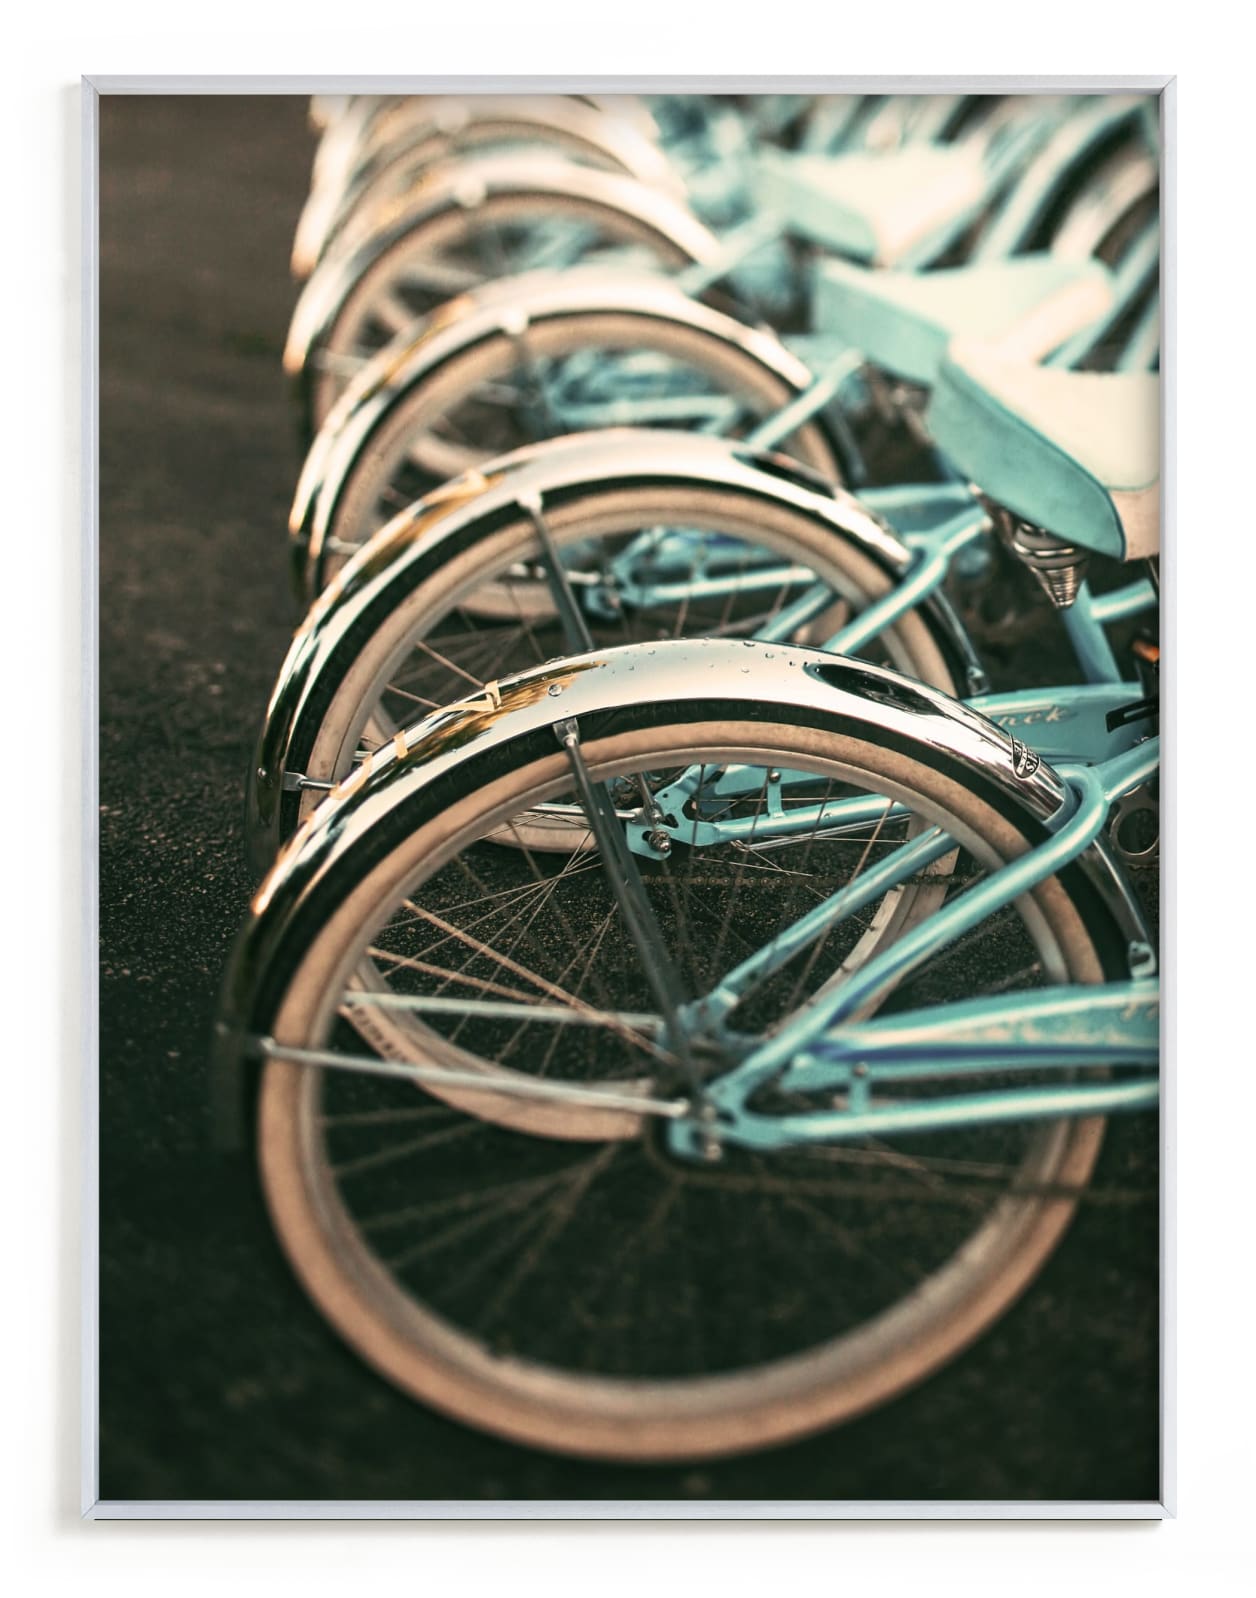 Shop Let's Go Ride 30" X 40", MATTED WHITE WOOD FRAME from Minted on Openhaus